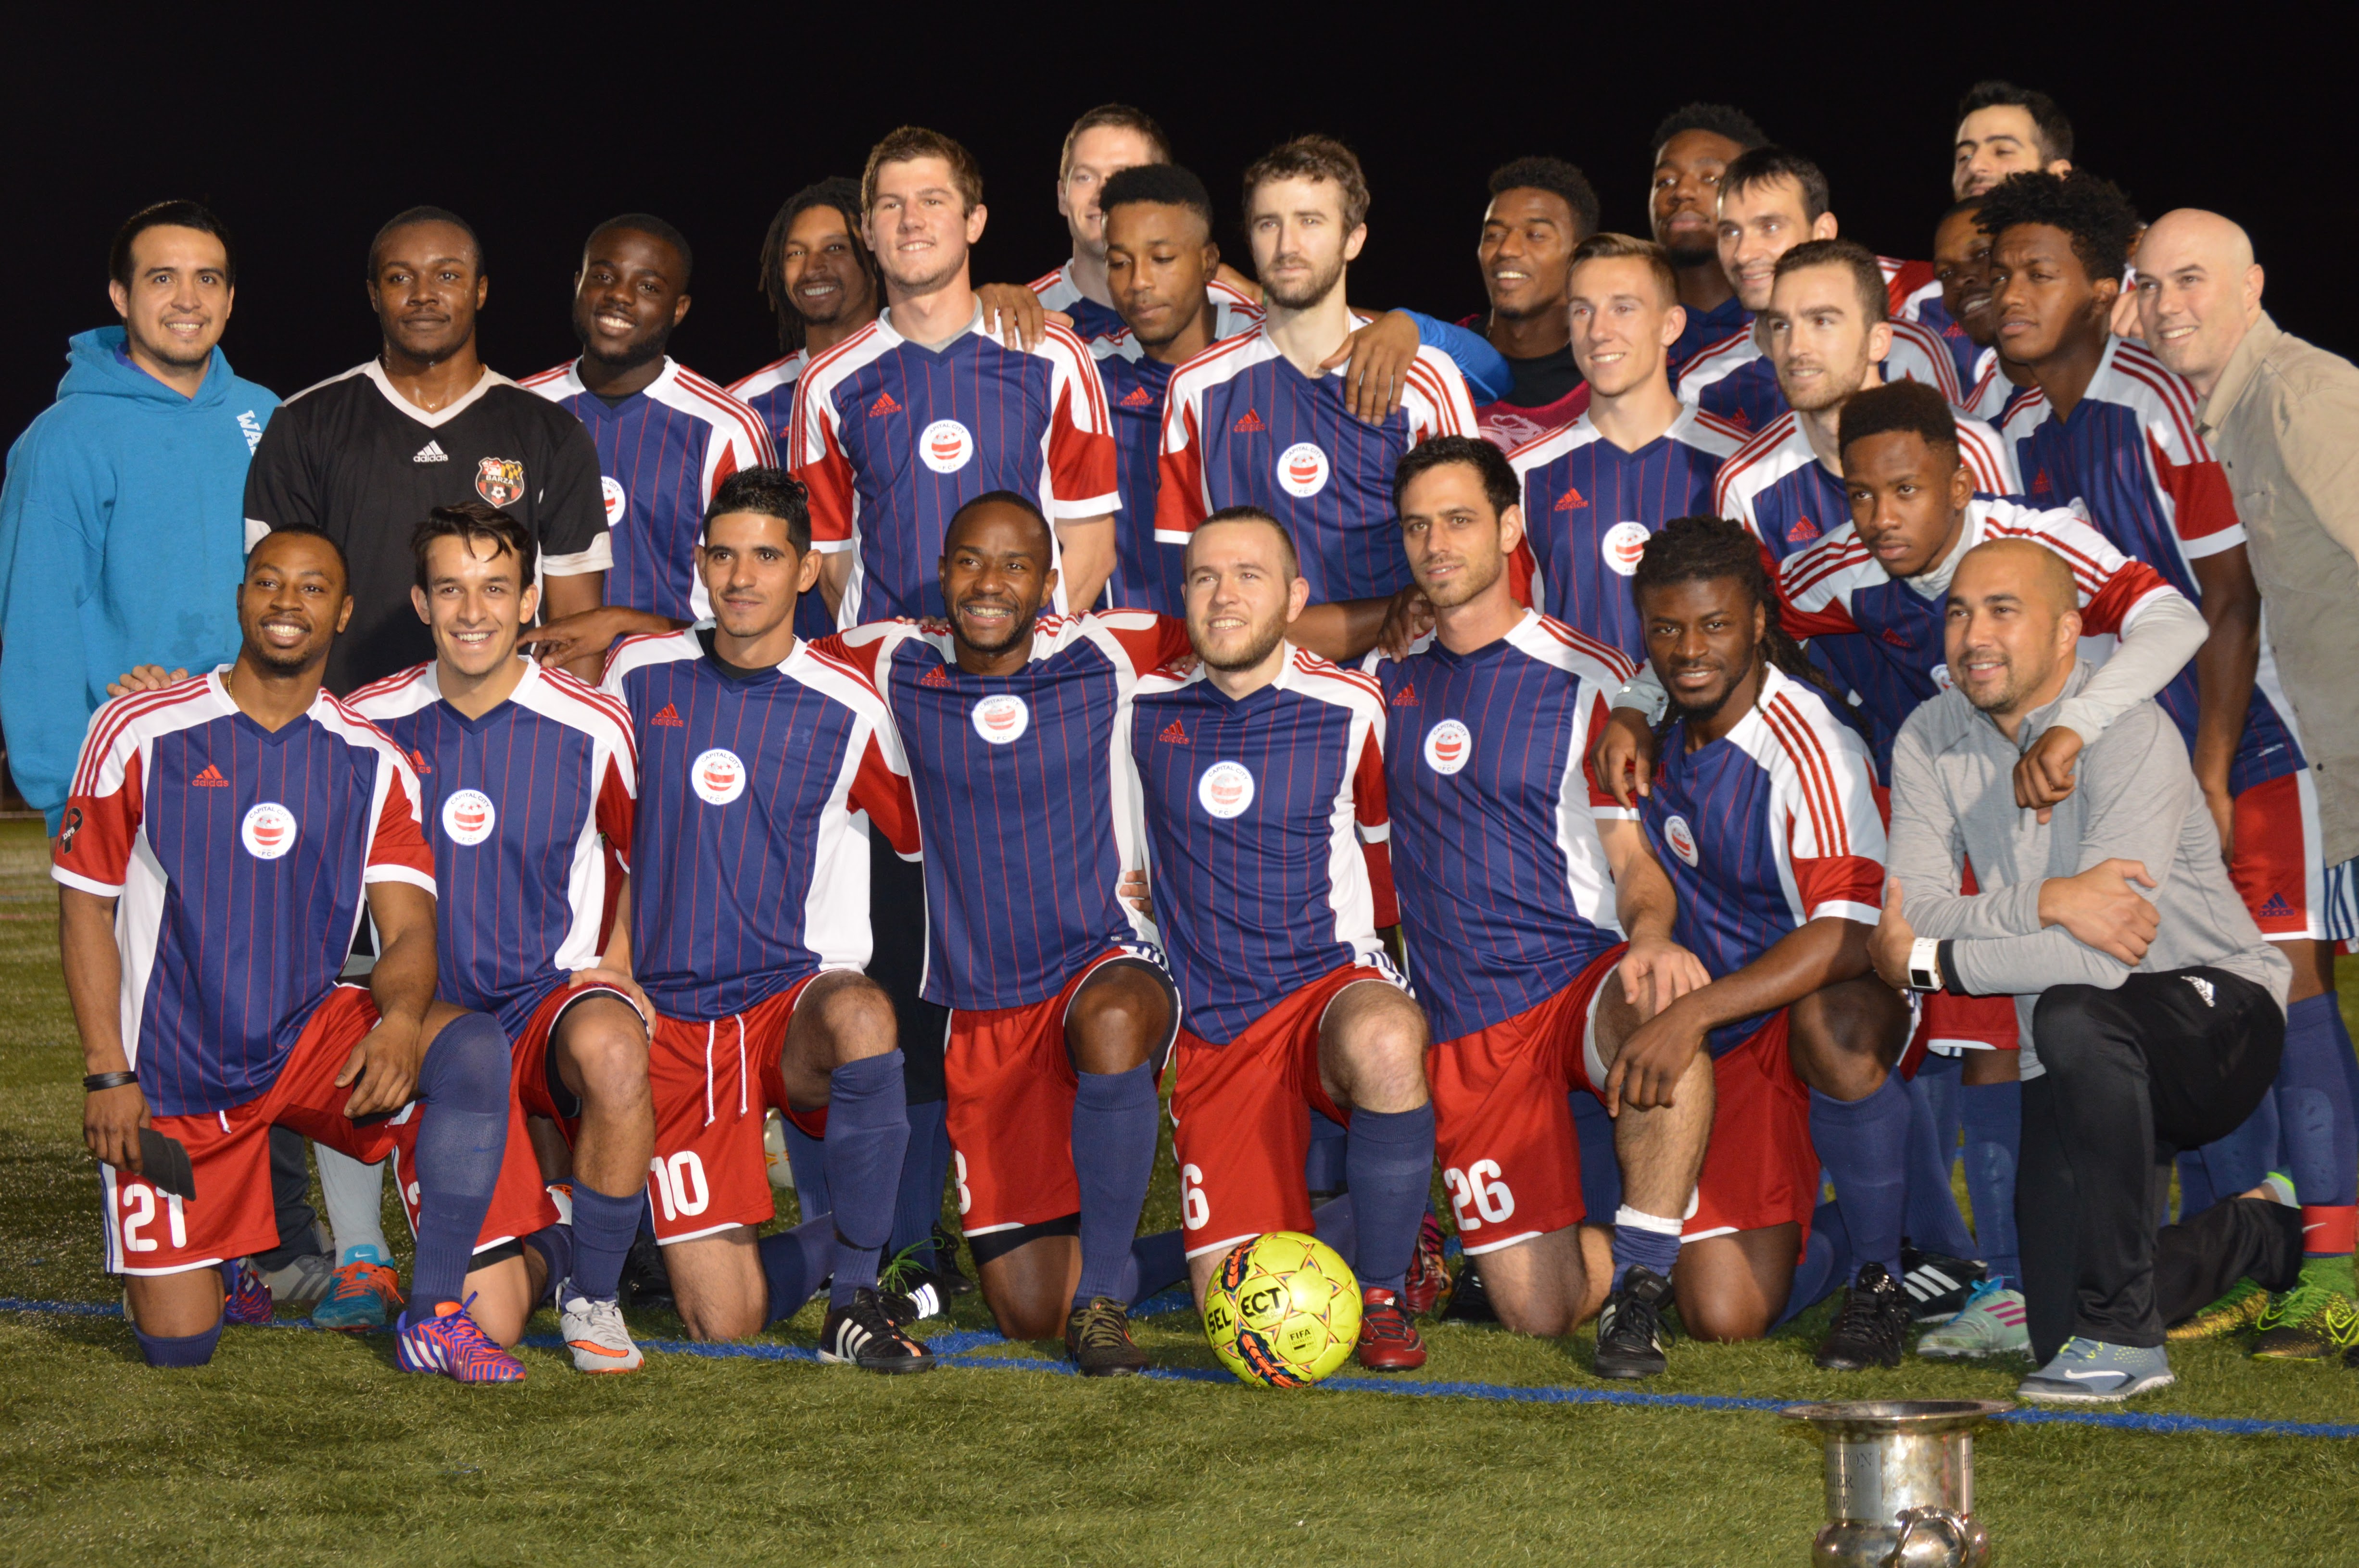 Capital City FC Win Fall 2015 Helge Boes Cup (WPL Championship)